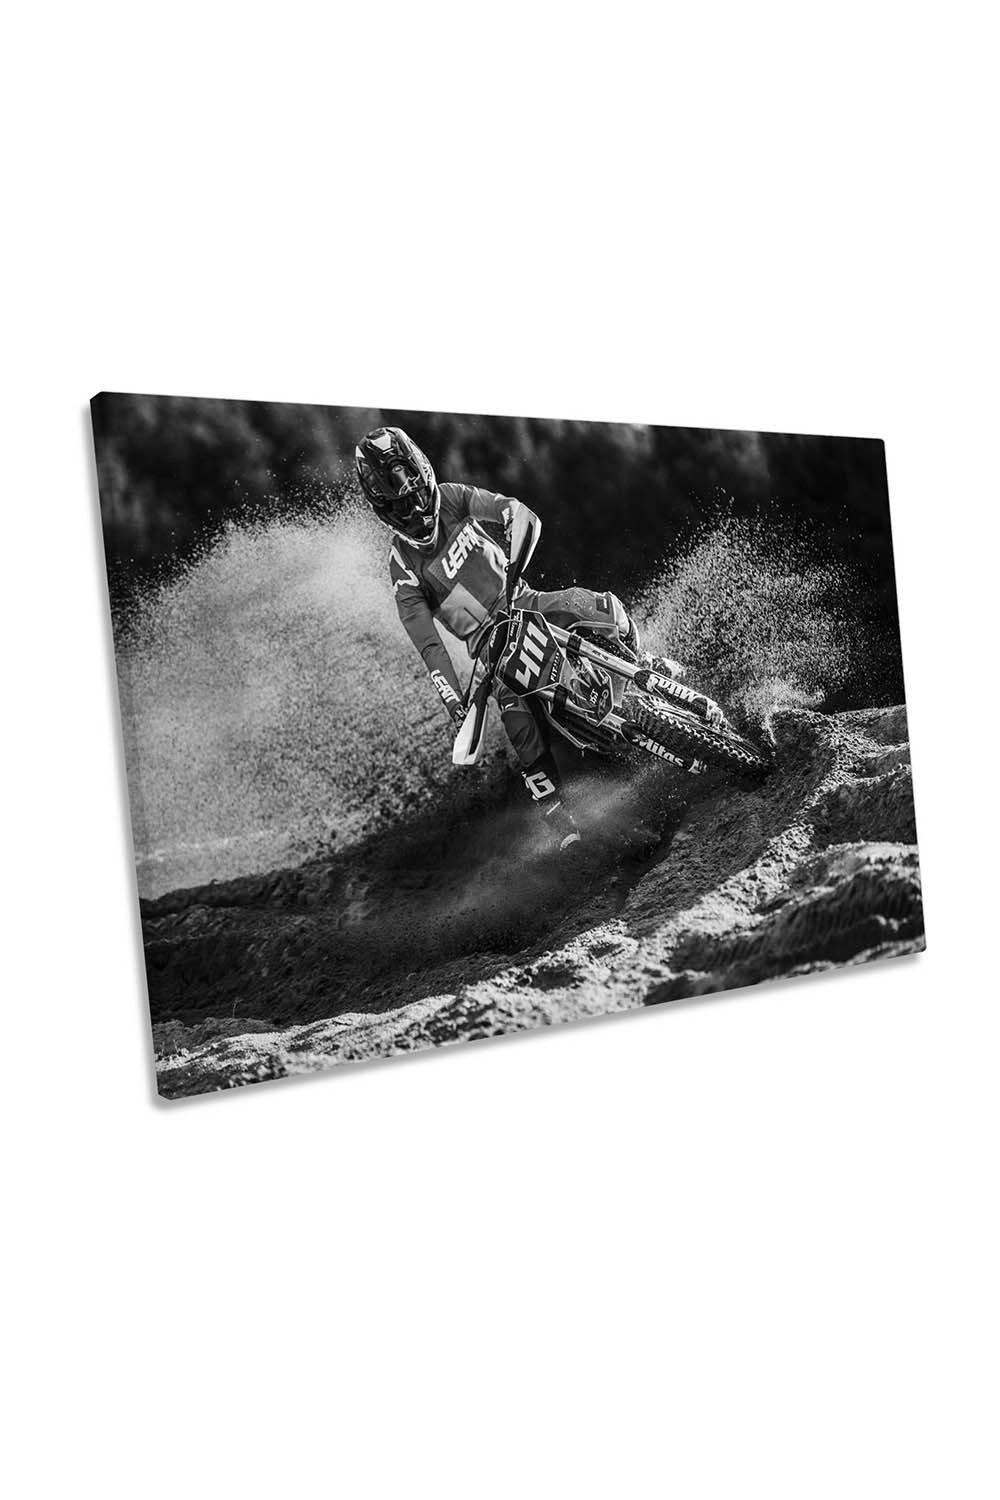 Motocross Extreme Sports Motor Bike Canvas Wall Art Picture Print